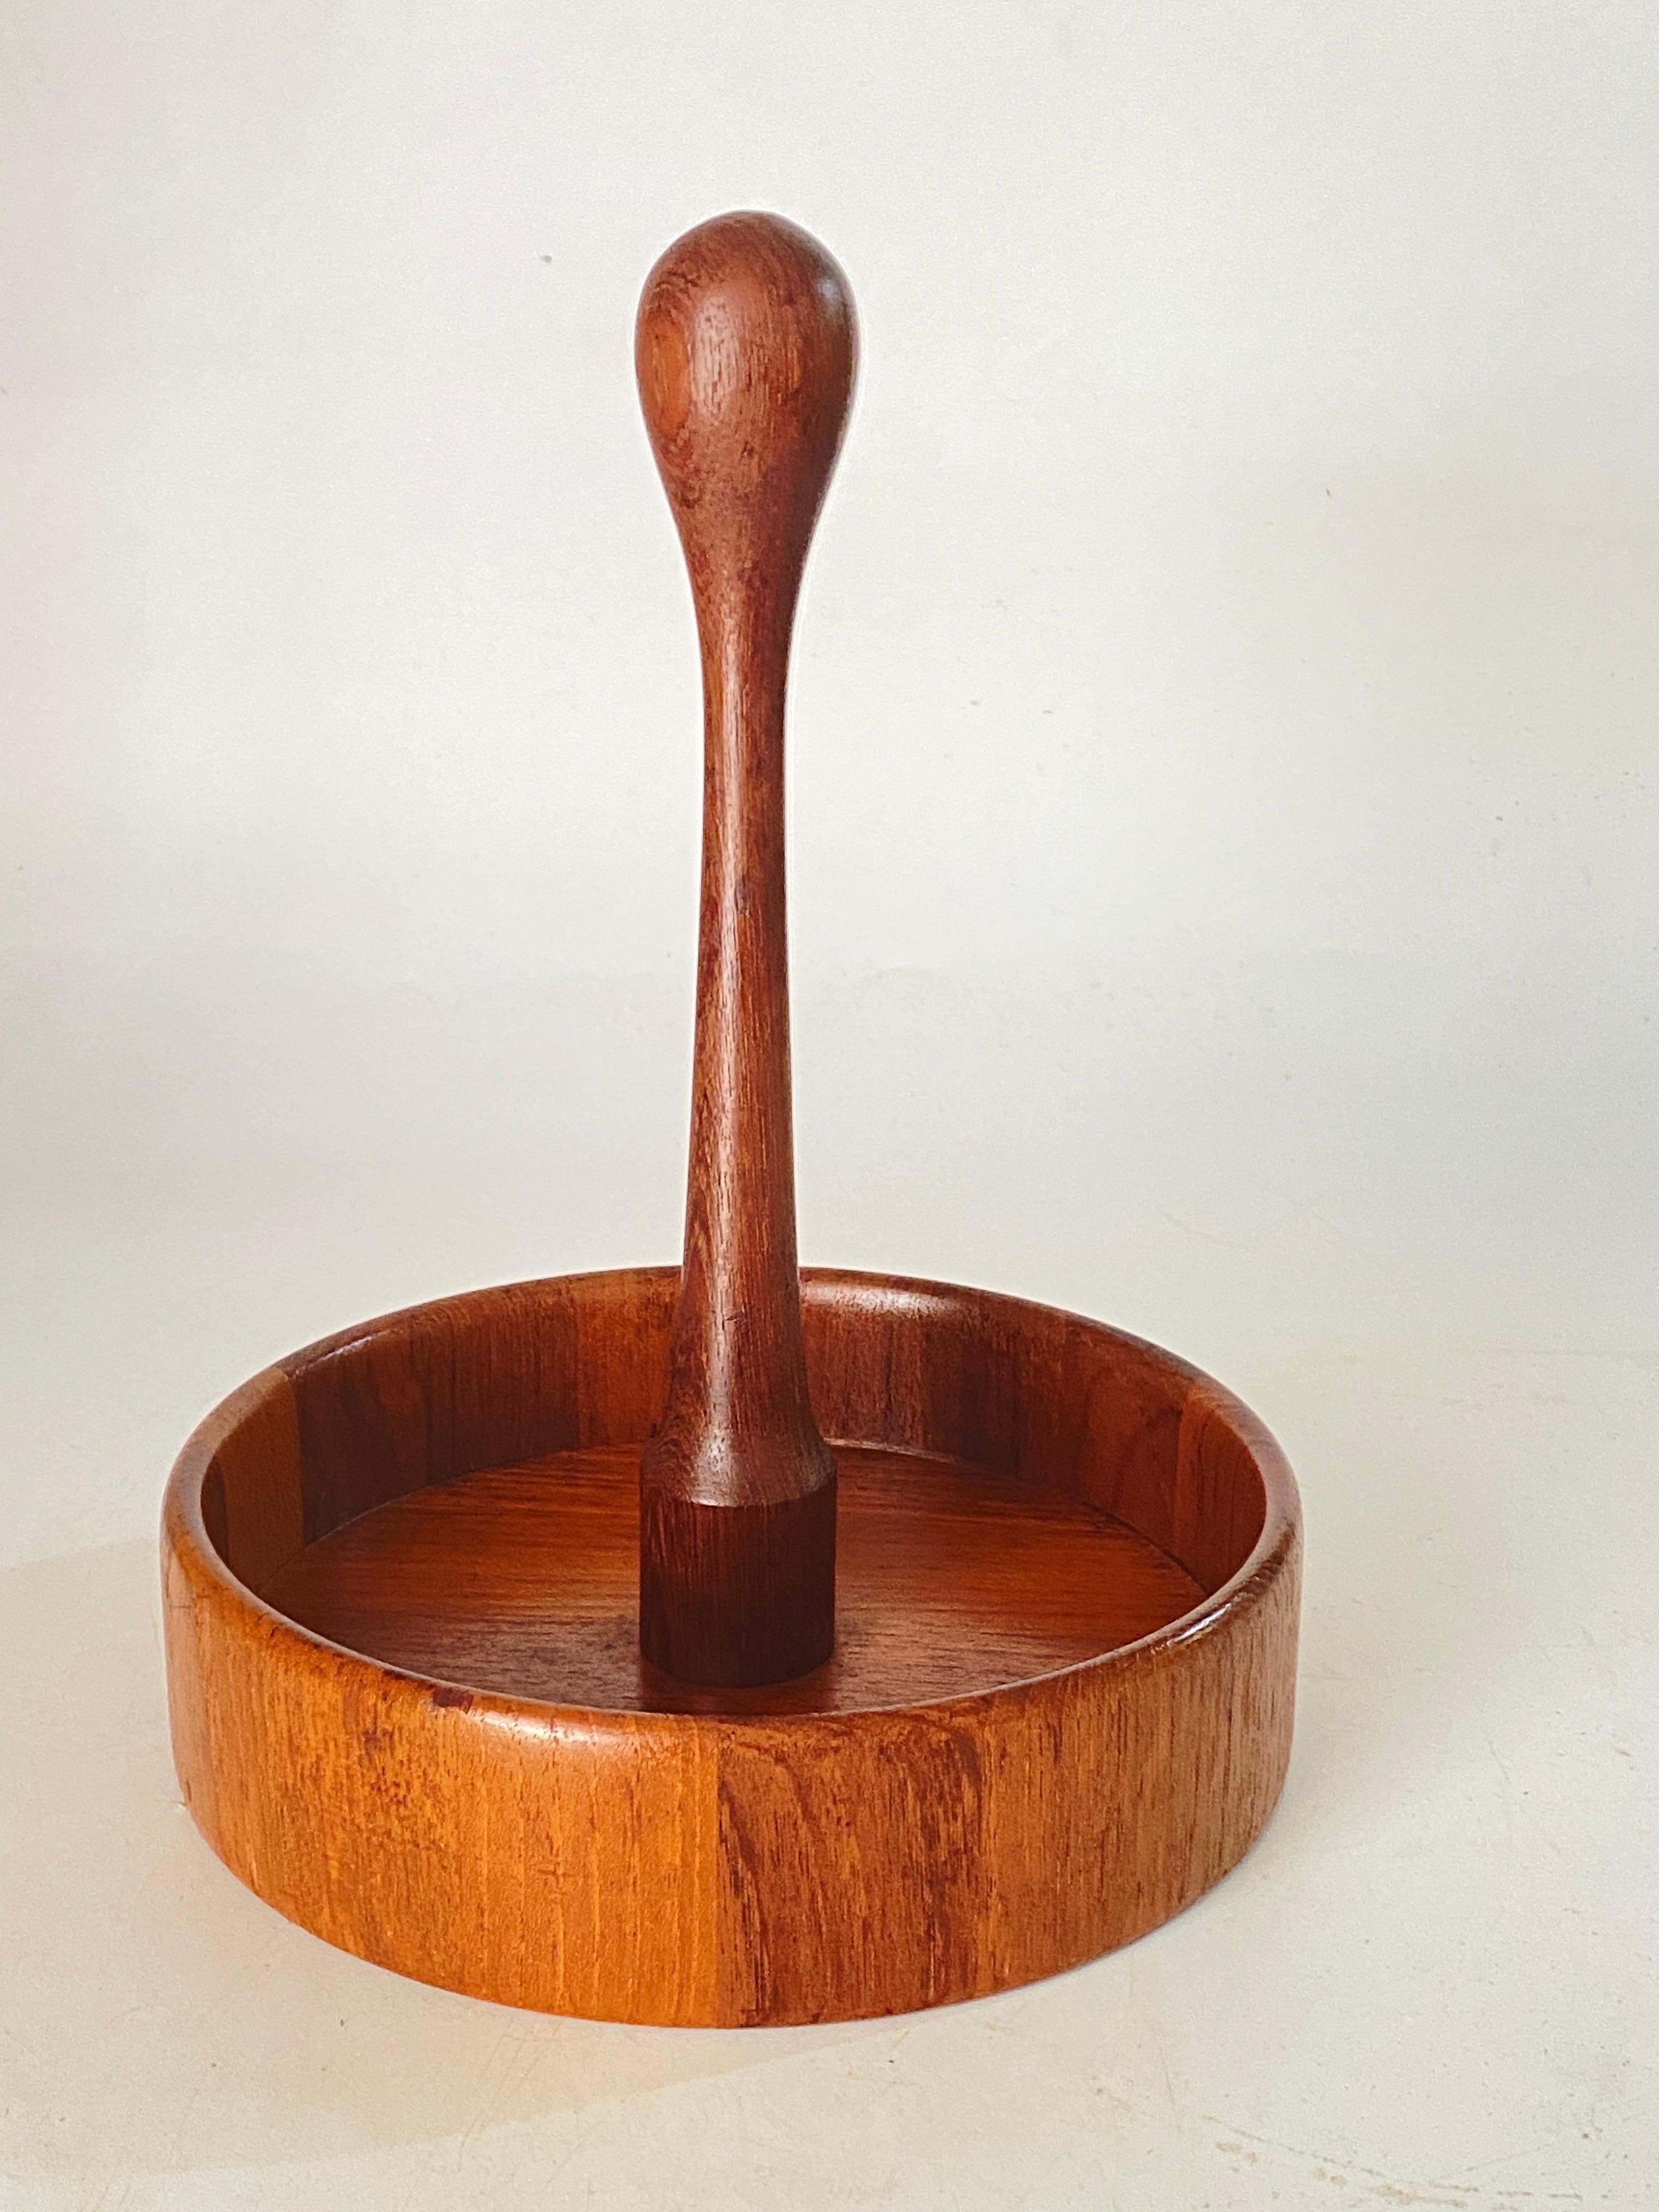 Spice Tray in Wood Denmark 1960s Brown Color with a wooden handle For Sale 1